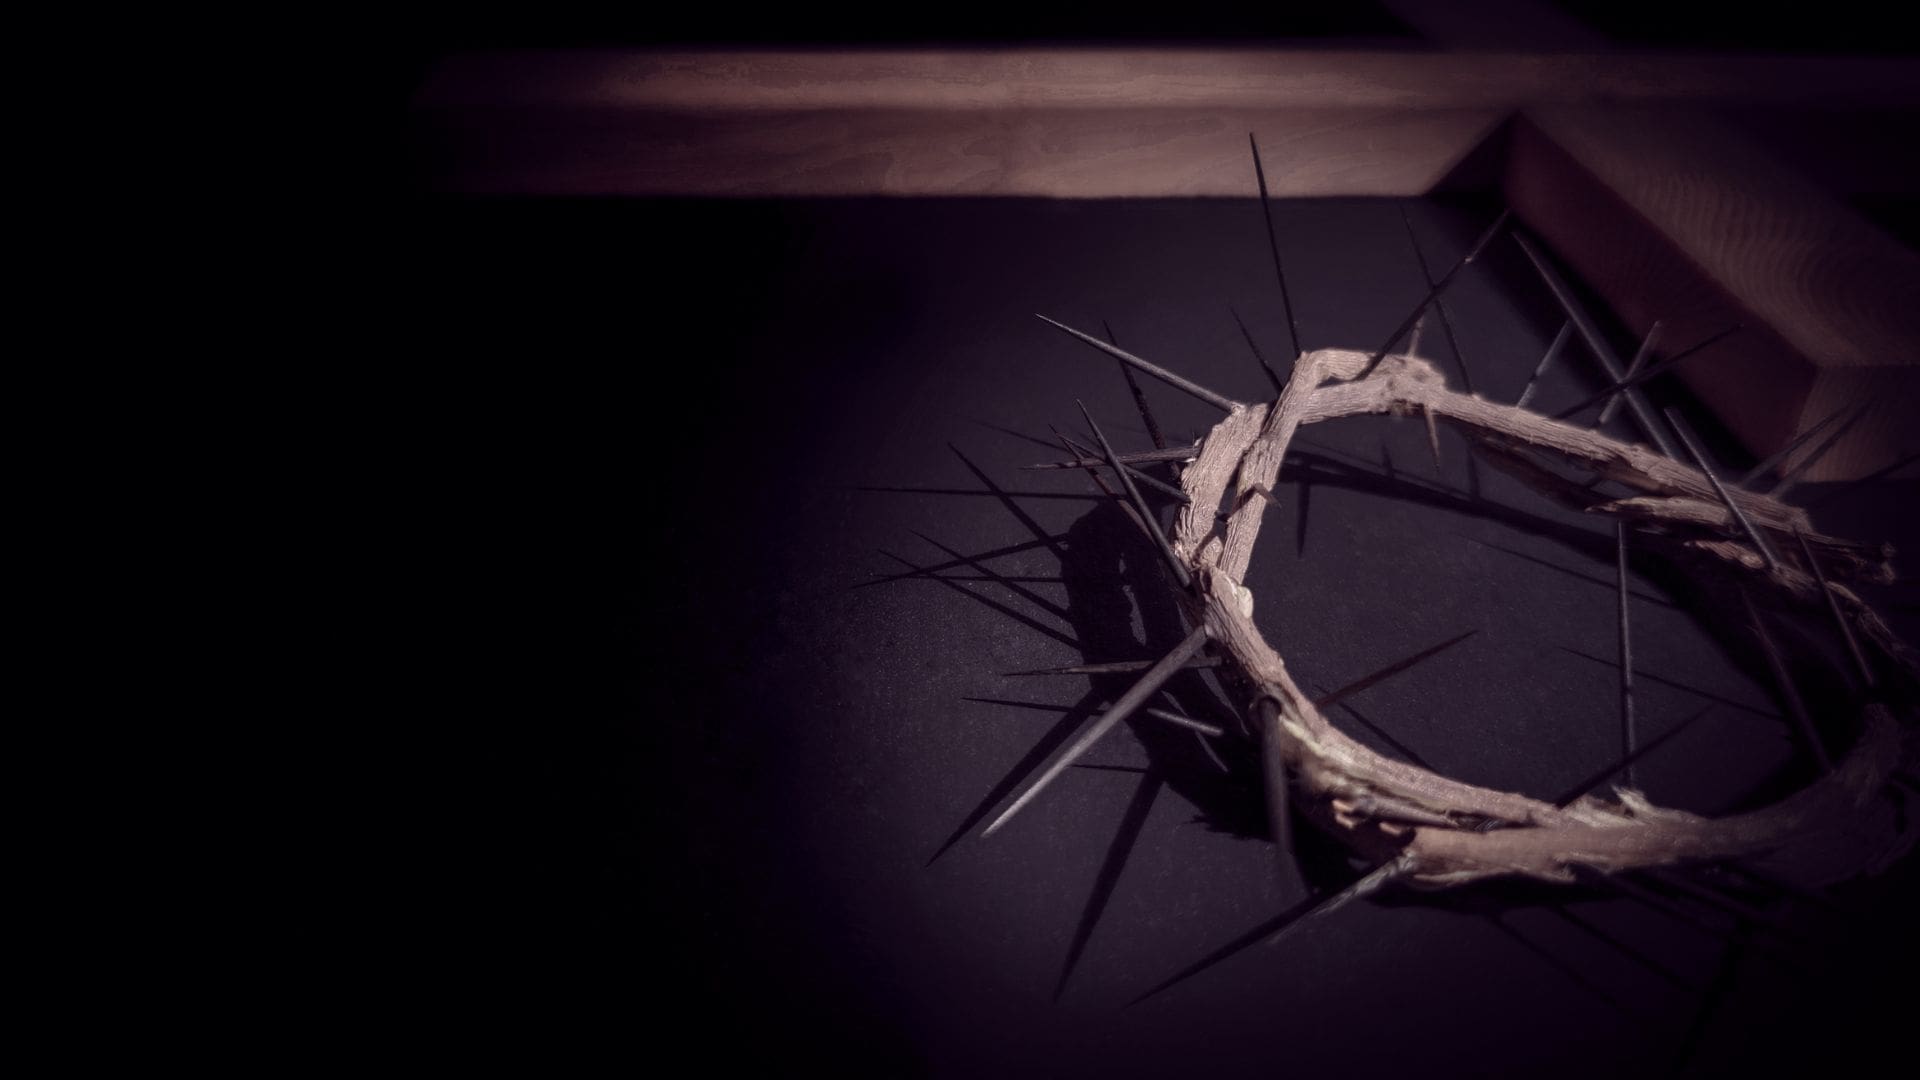 A crown of thorns with spikes on it.